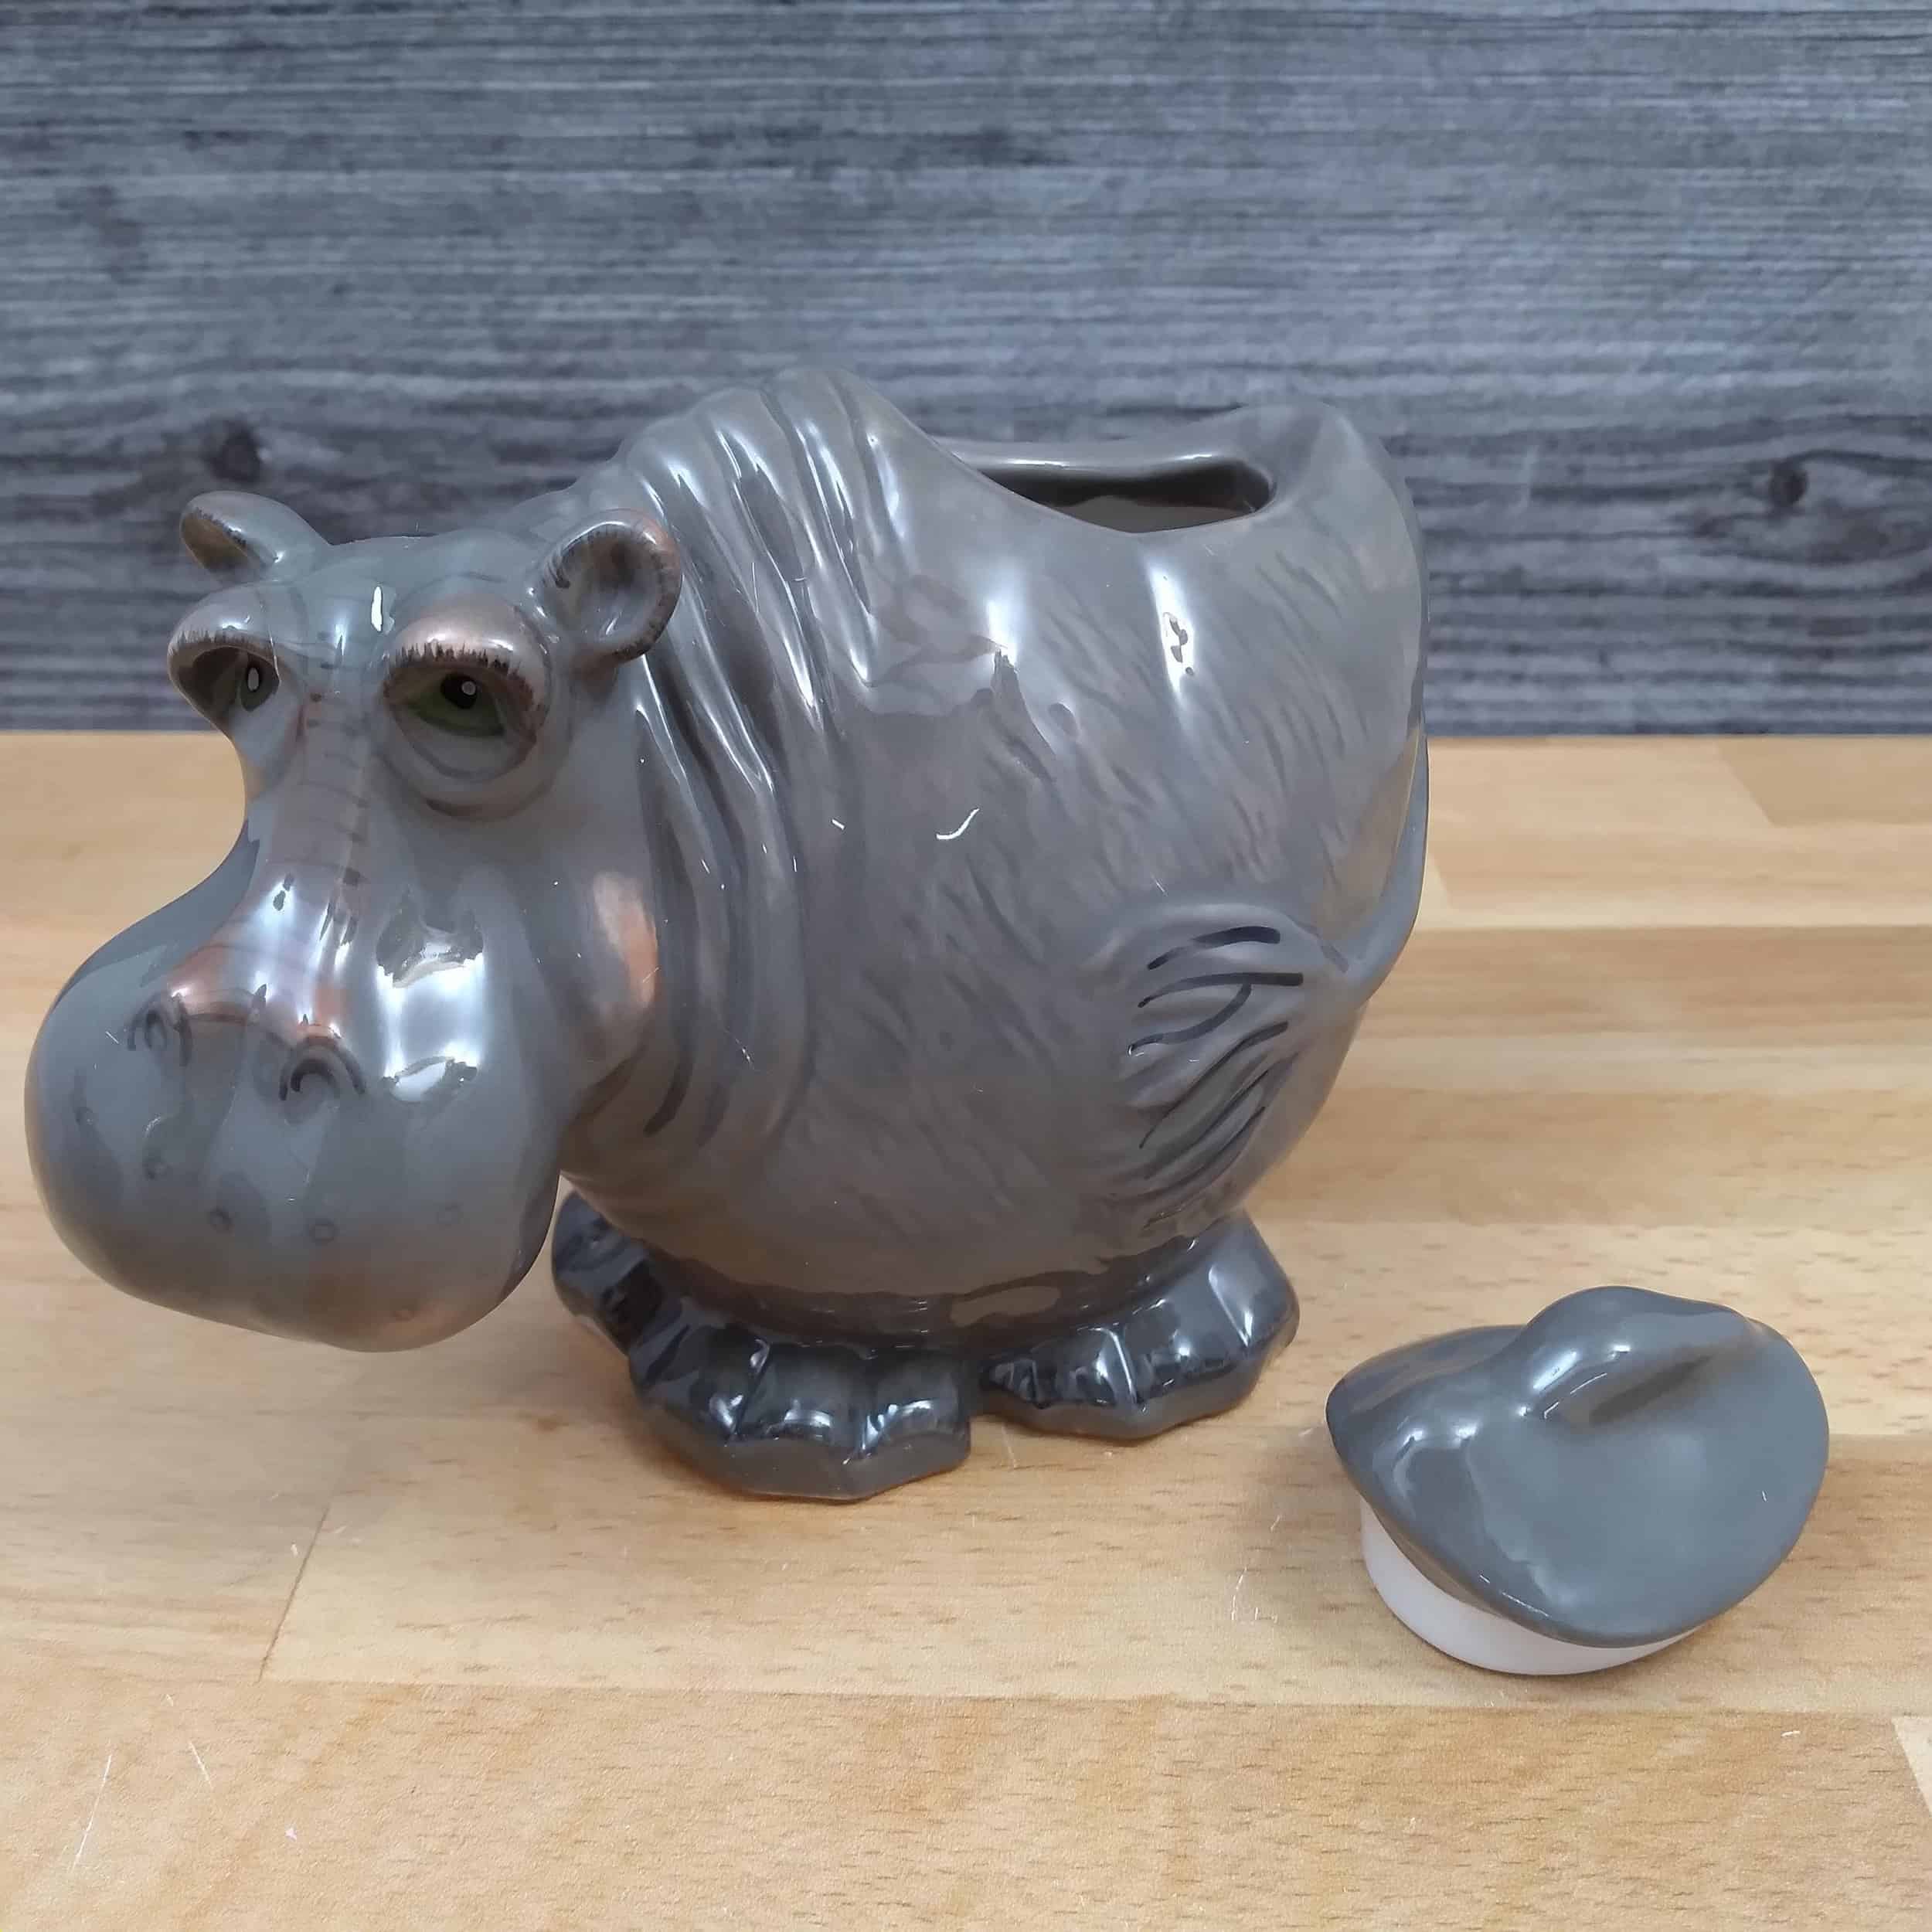 This Hippo Sugar Bowl and Creamer Set Decorative by Blue Sky is made with love by Premier Homegoods! Shop more unique gift ideas today with Spots Initiatives, the best way to support creators.